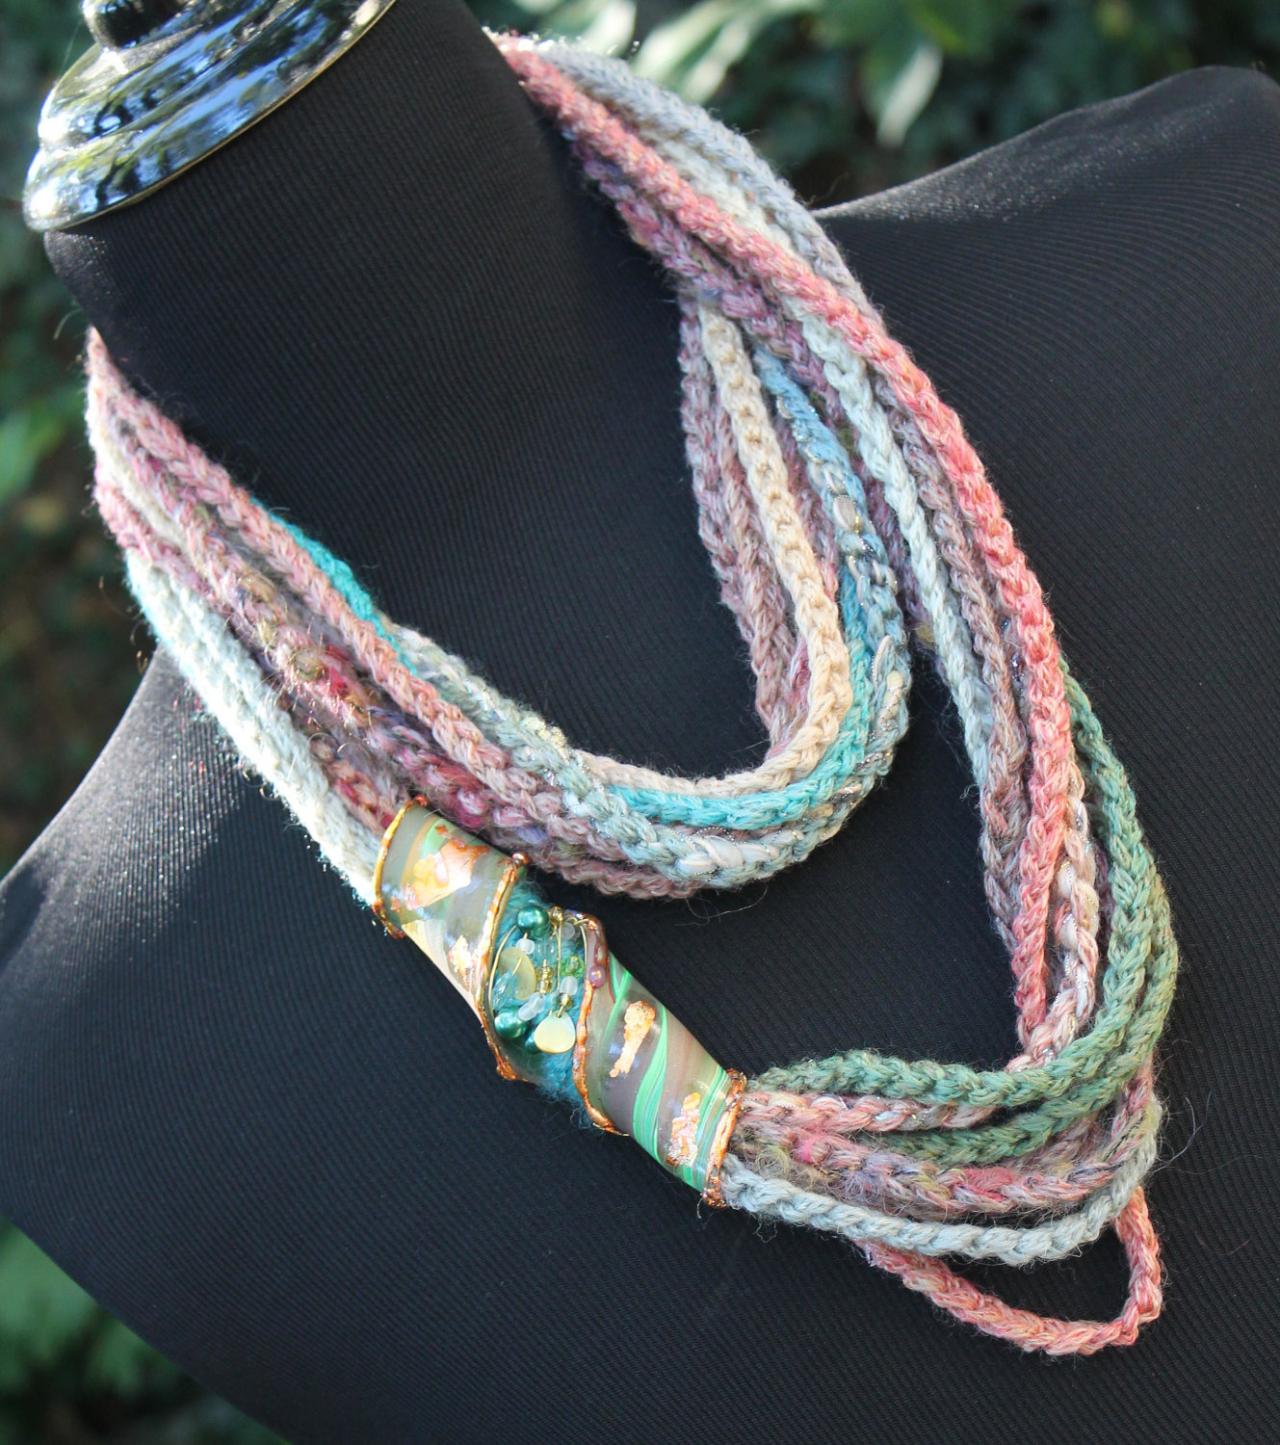 Gifted at Cannes GBK Gift Lounge, Sunset colored wrap scarf with jeweled, beaded twist, gold leaf embossed, sea green, copper, rose, teal